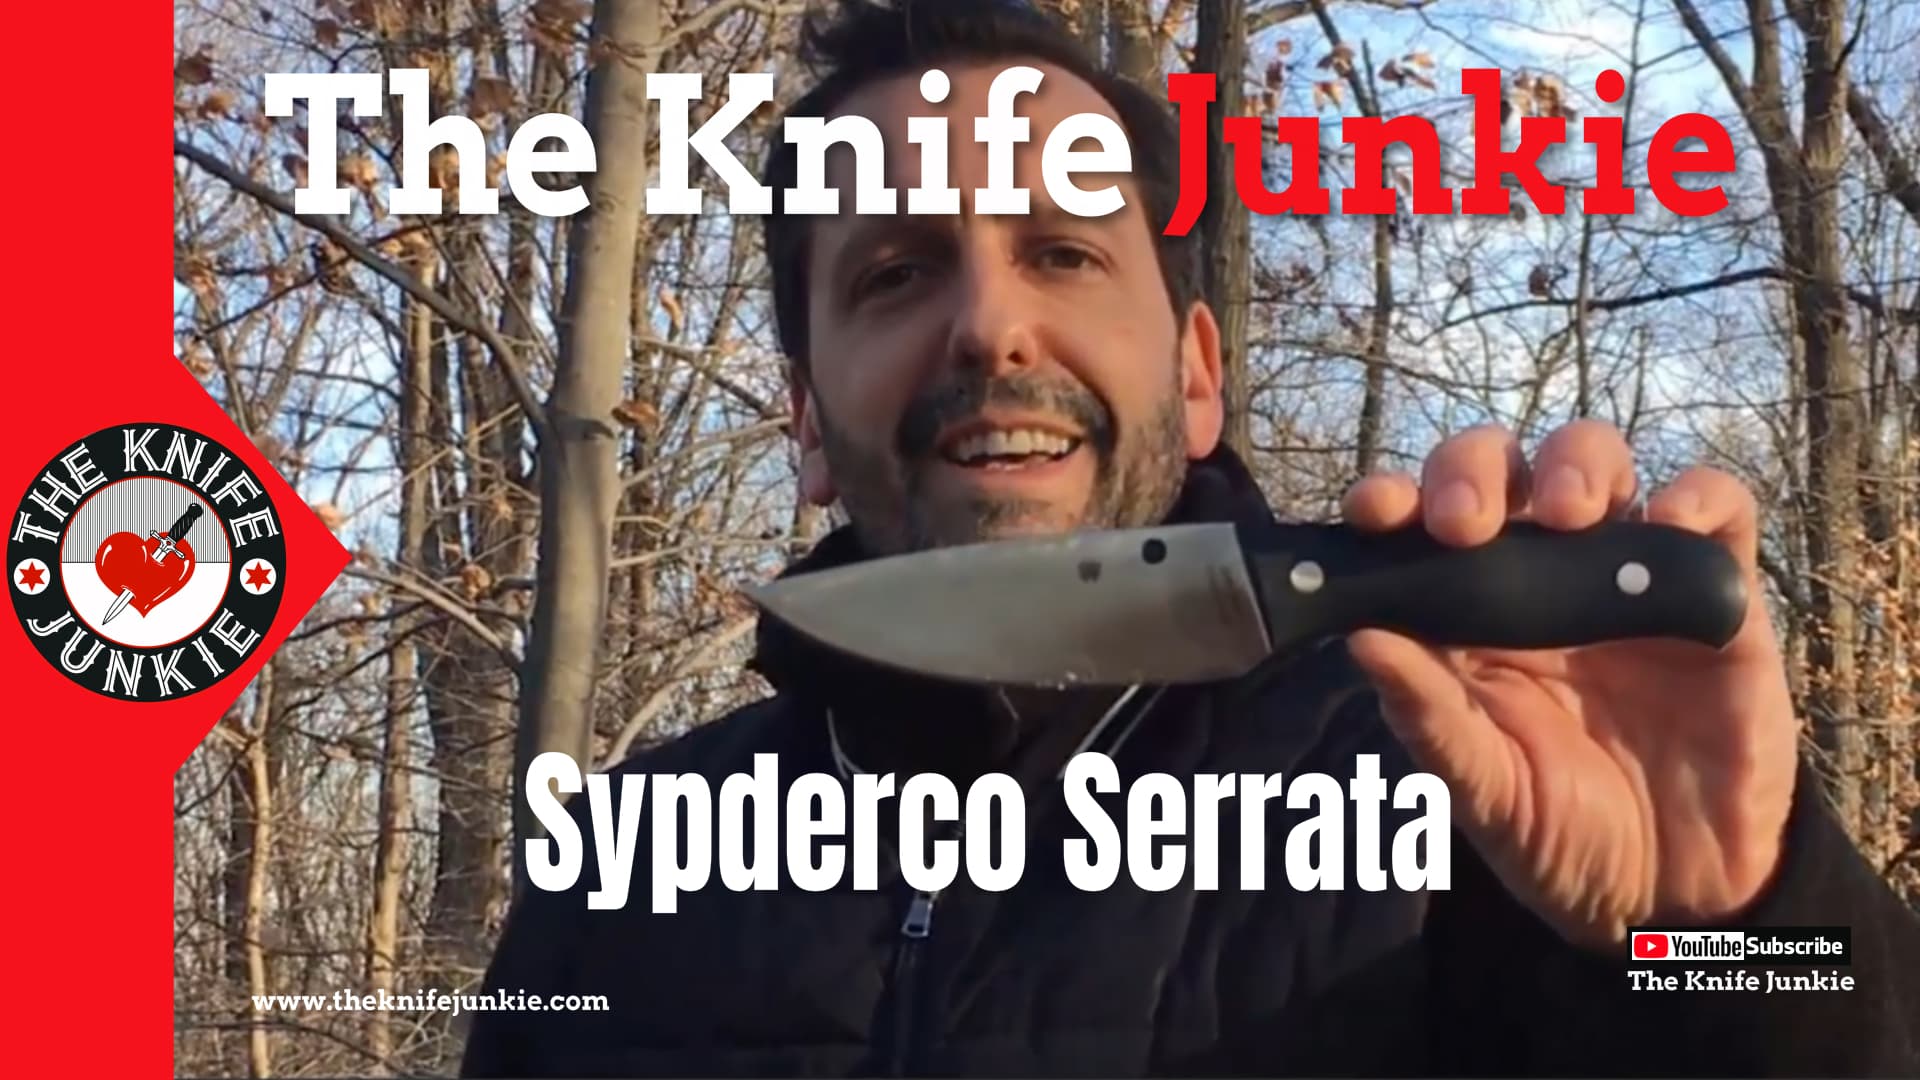 Syderco Serrata Video from The Knife Junkie